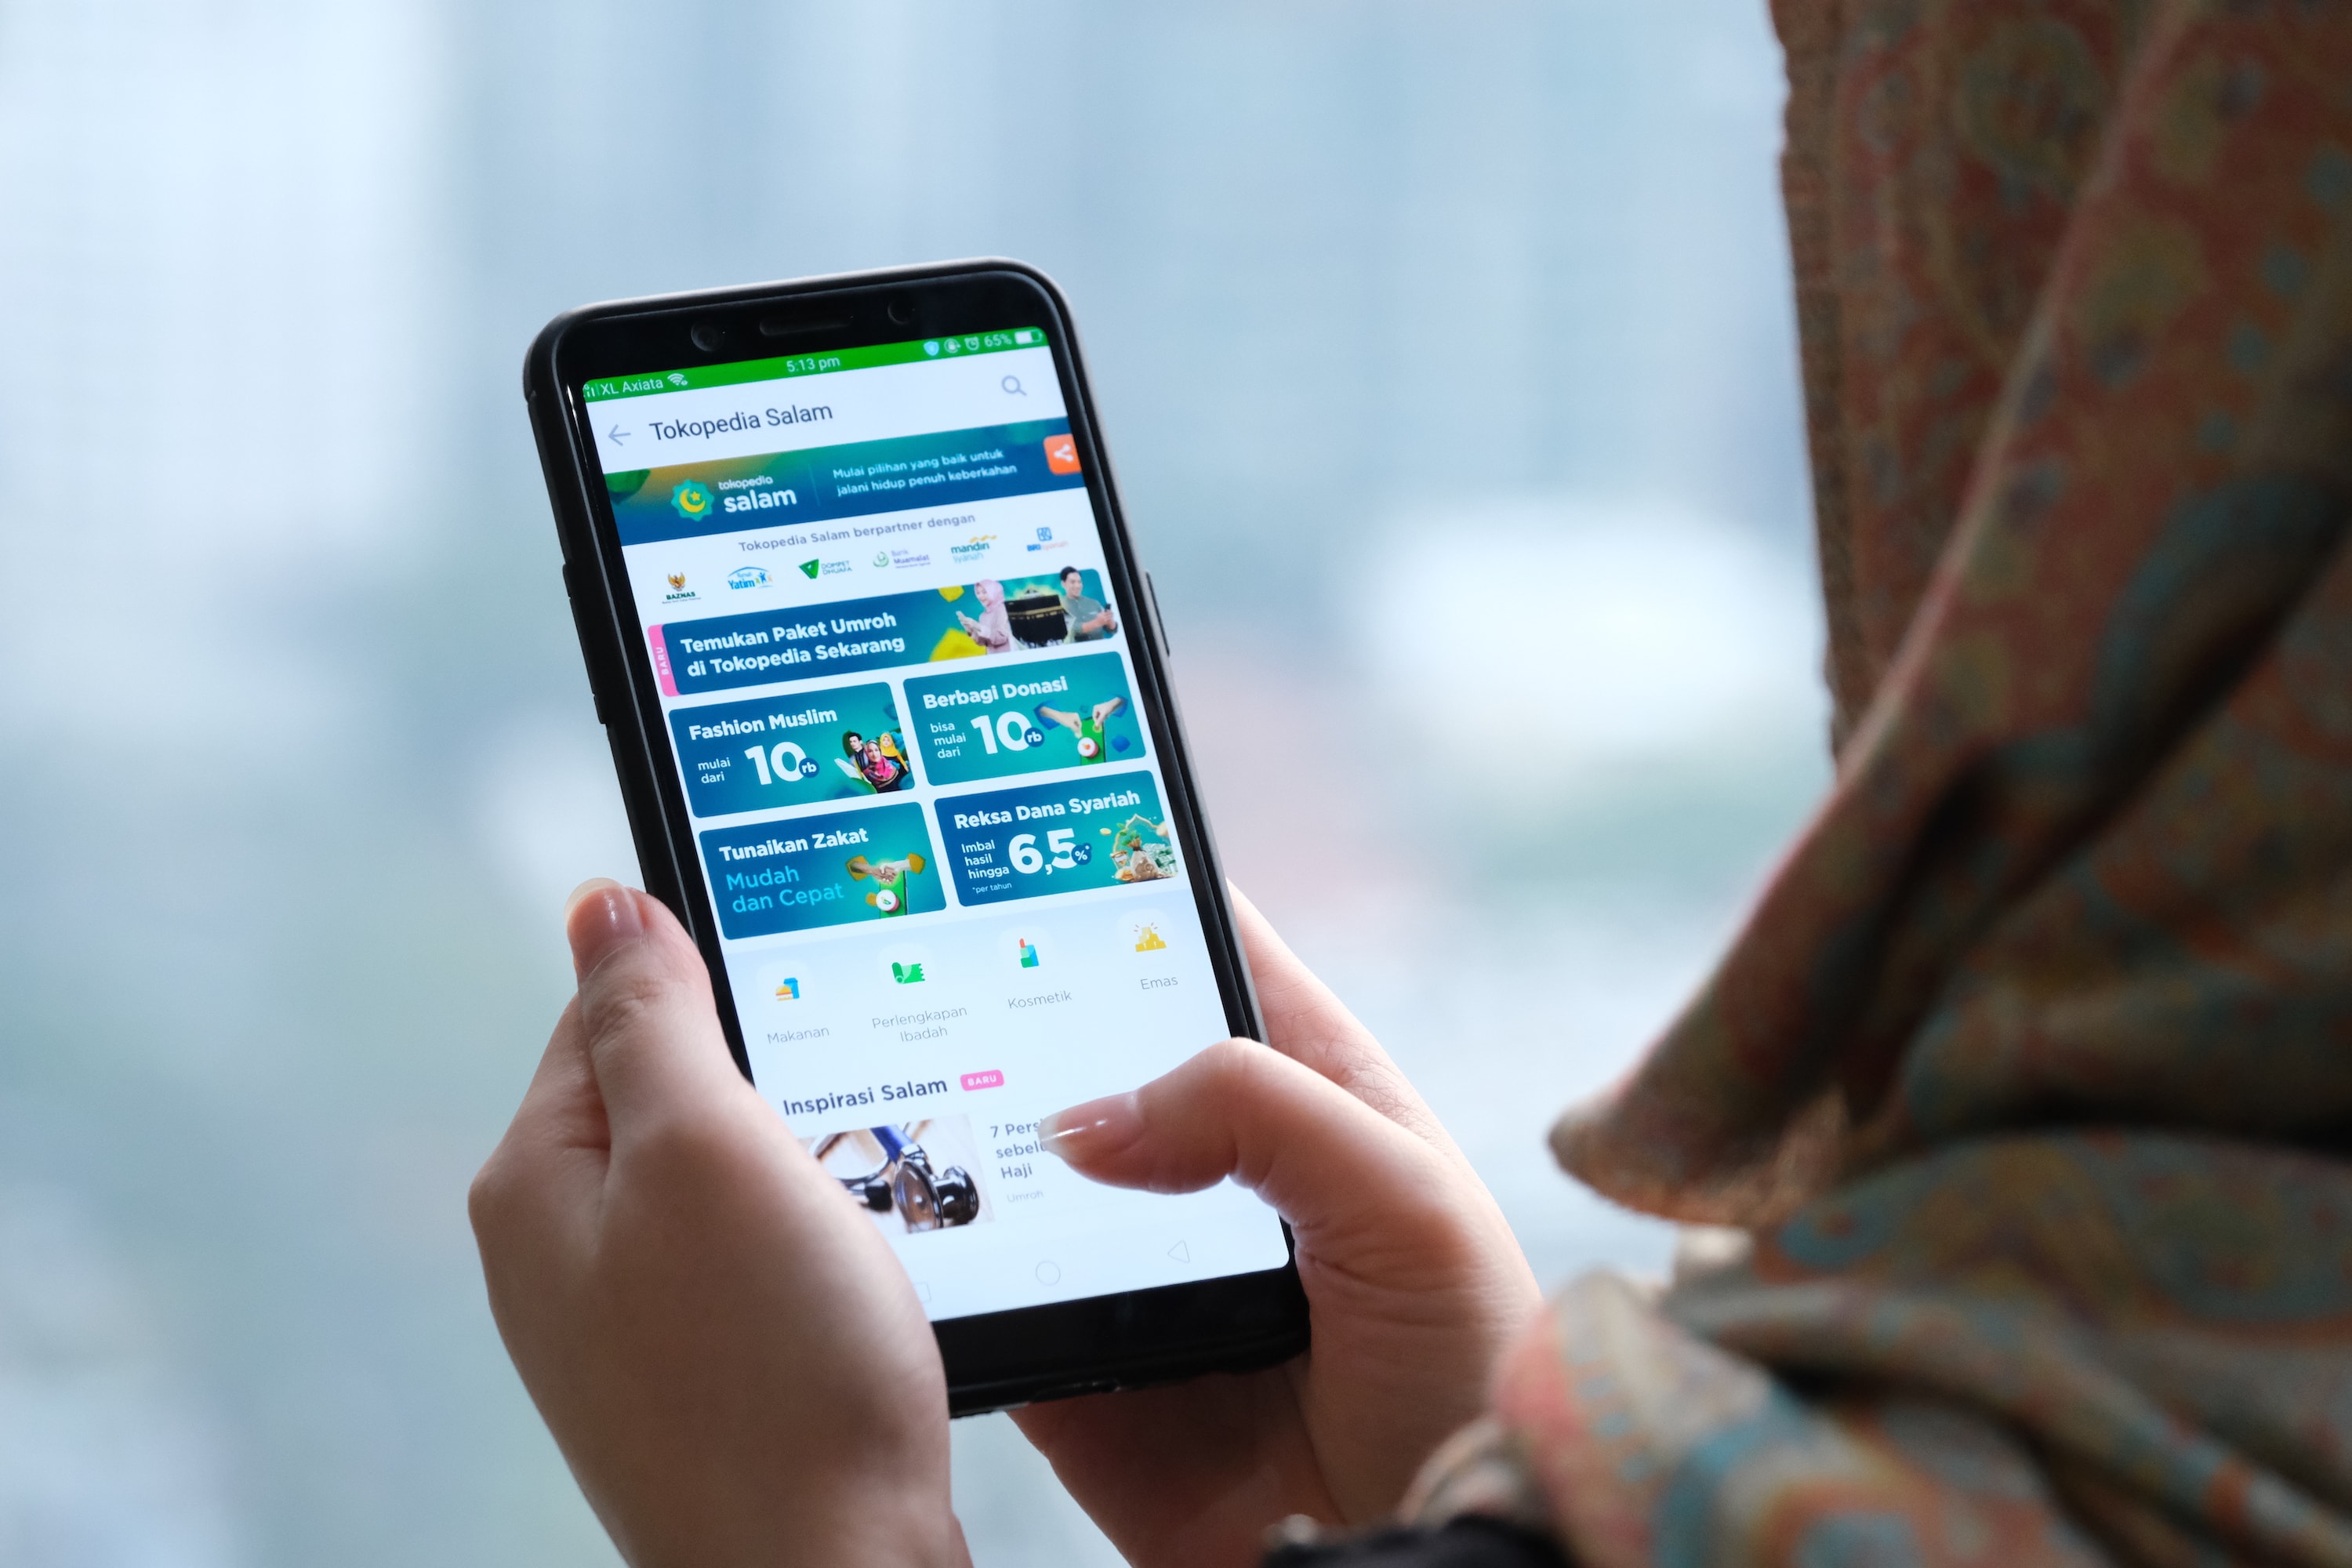 Indonesian startups buckle up to ride the rising sharia market